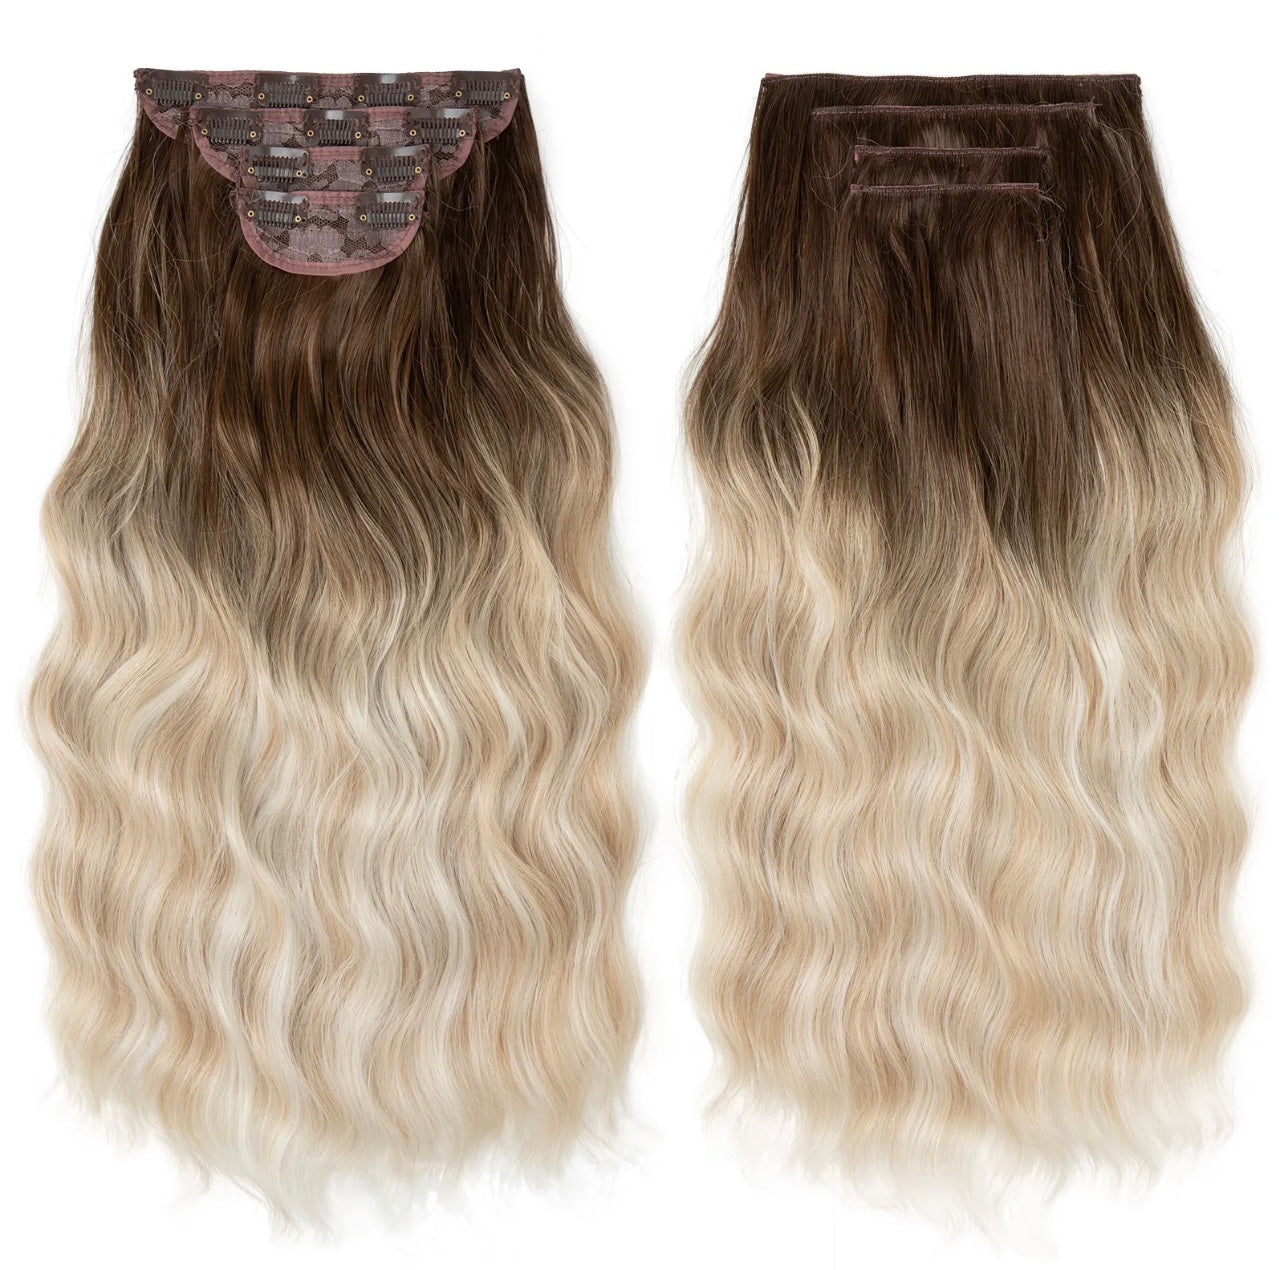 BLONDE BOYALAGE - SUPER THICK 22” 4 PIECE WAIST Length WAVE CLIPS IN HAIR Extensions